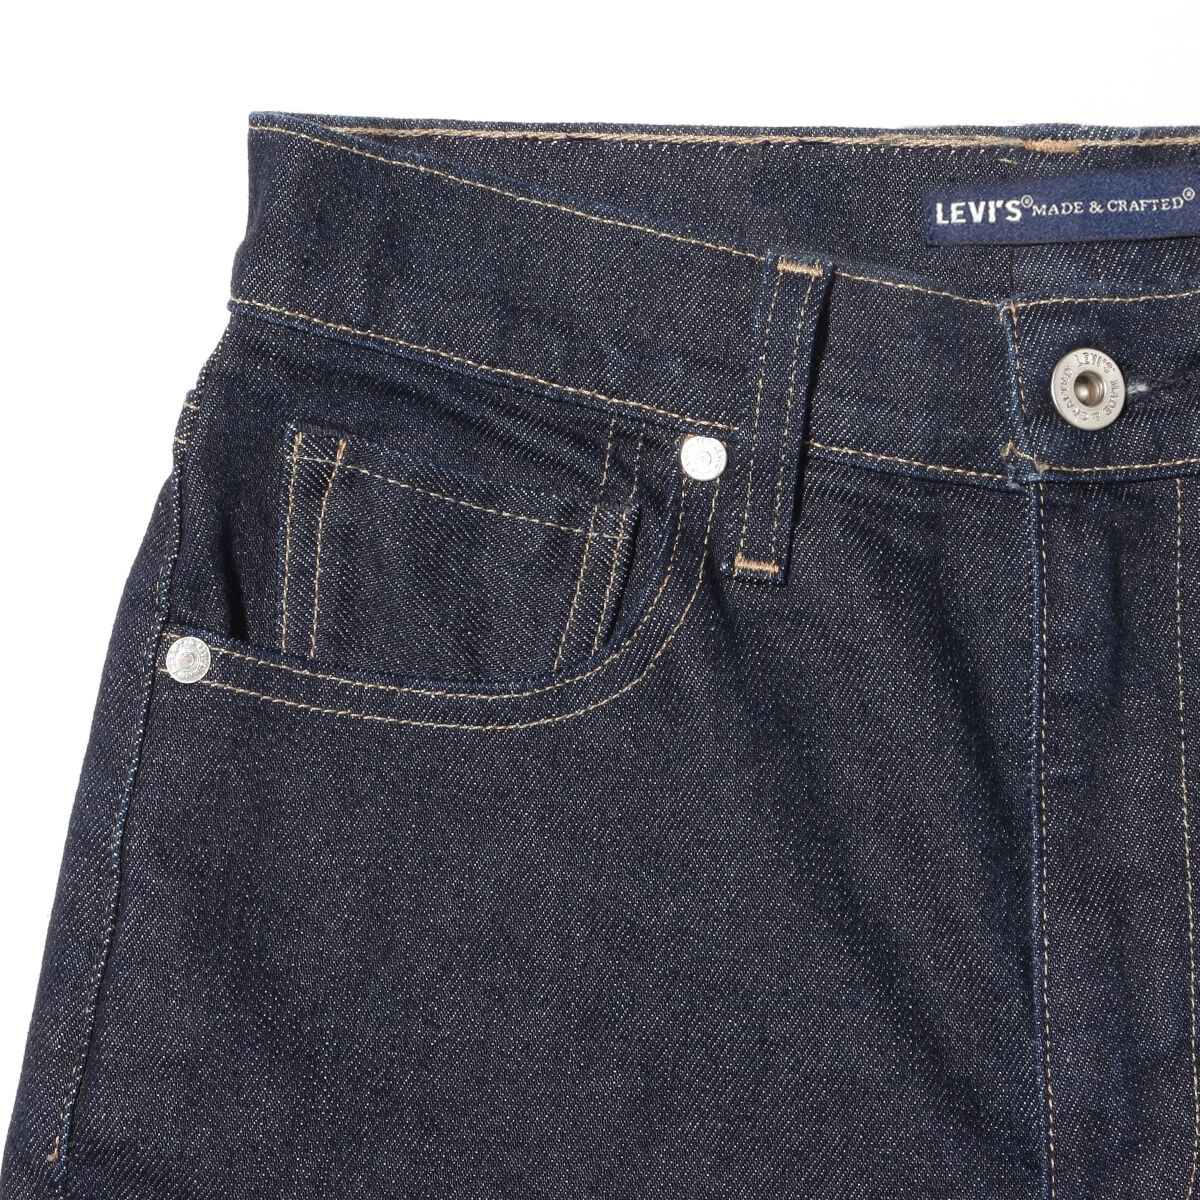 LEVI'S® MADEu0026CRAFTED®THE COLUMN RESIN VALLEY｜リーバイス® 公式通販